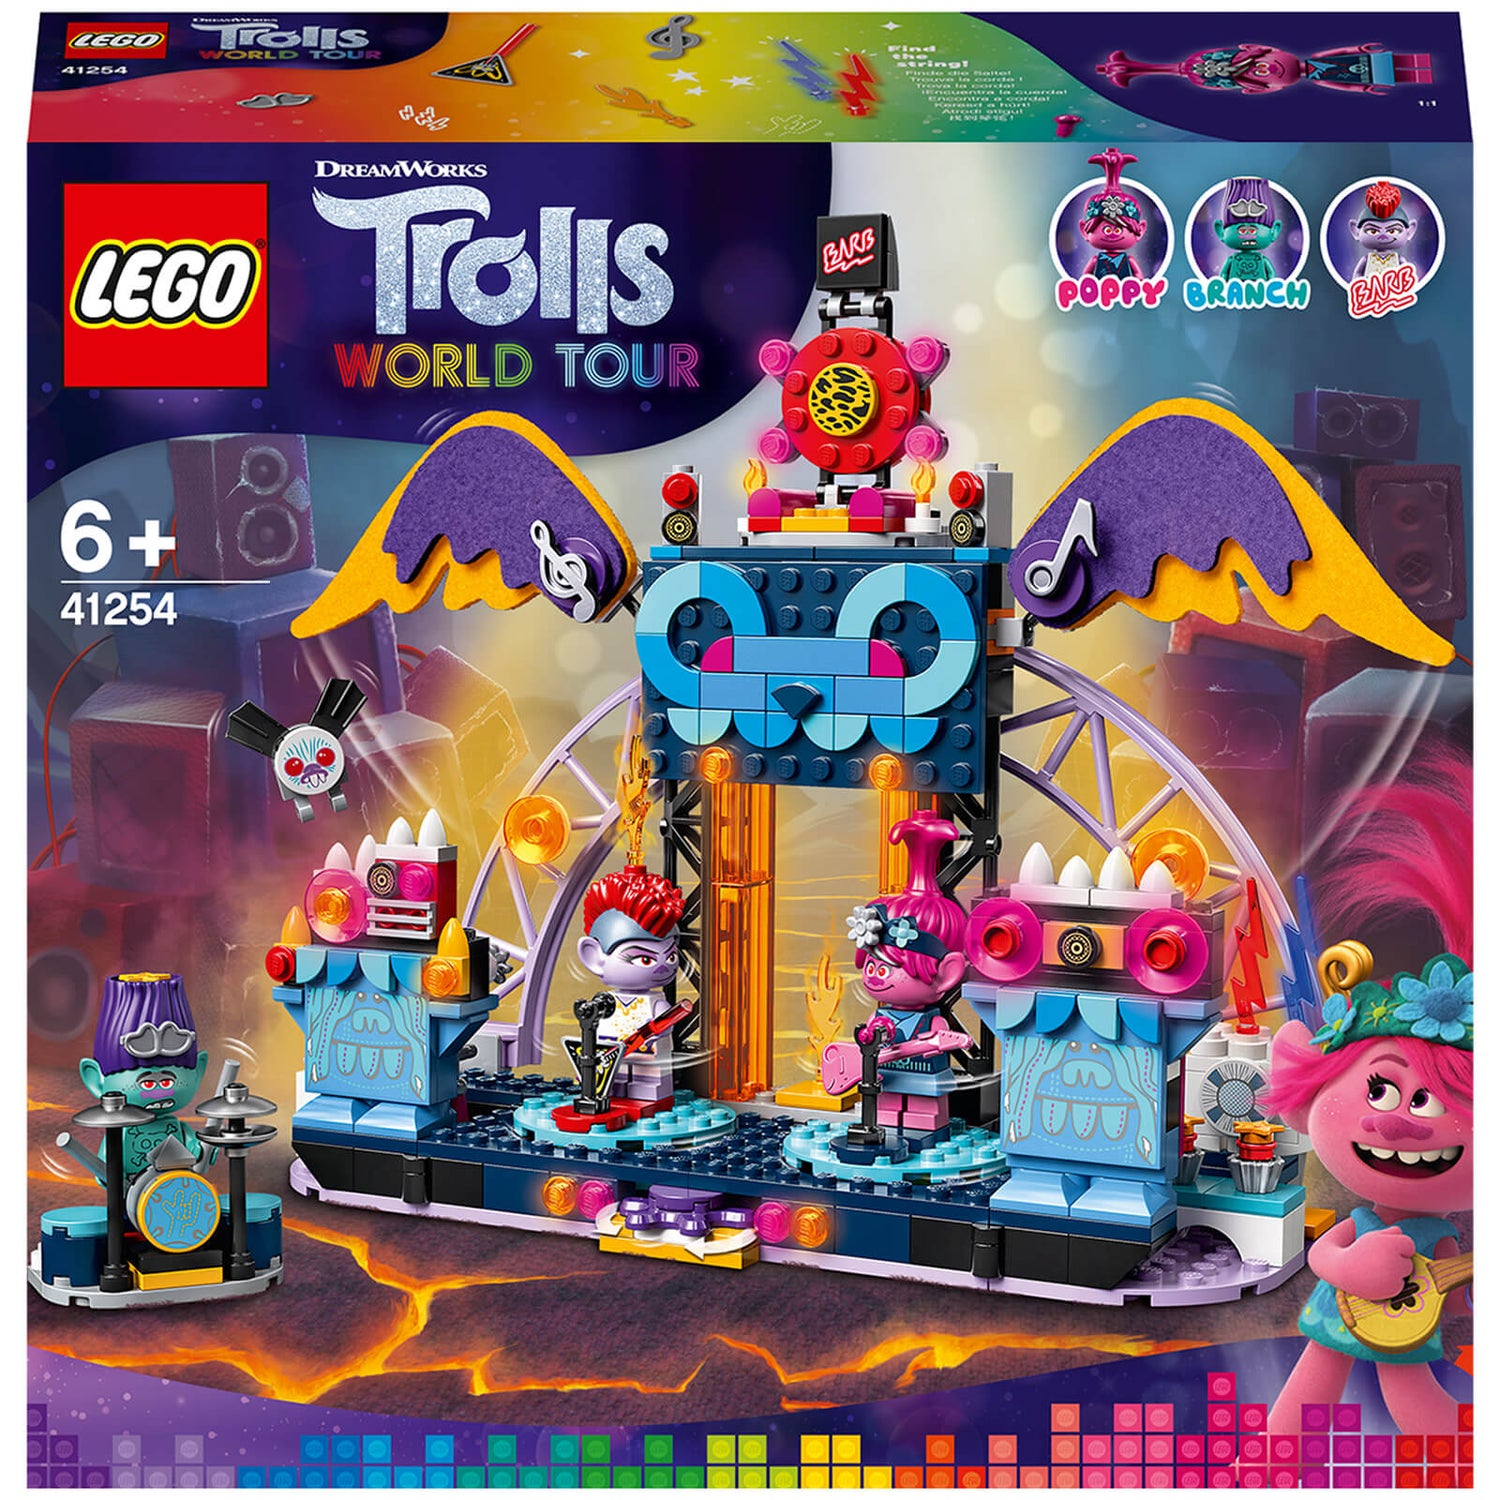 LEGO Trolls World Tour Minifigure Barb From Set 41254 for sale online